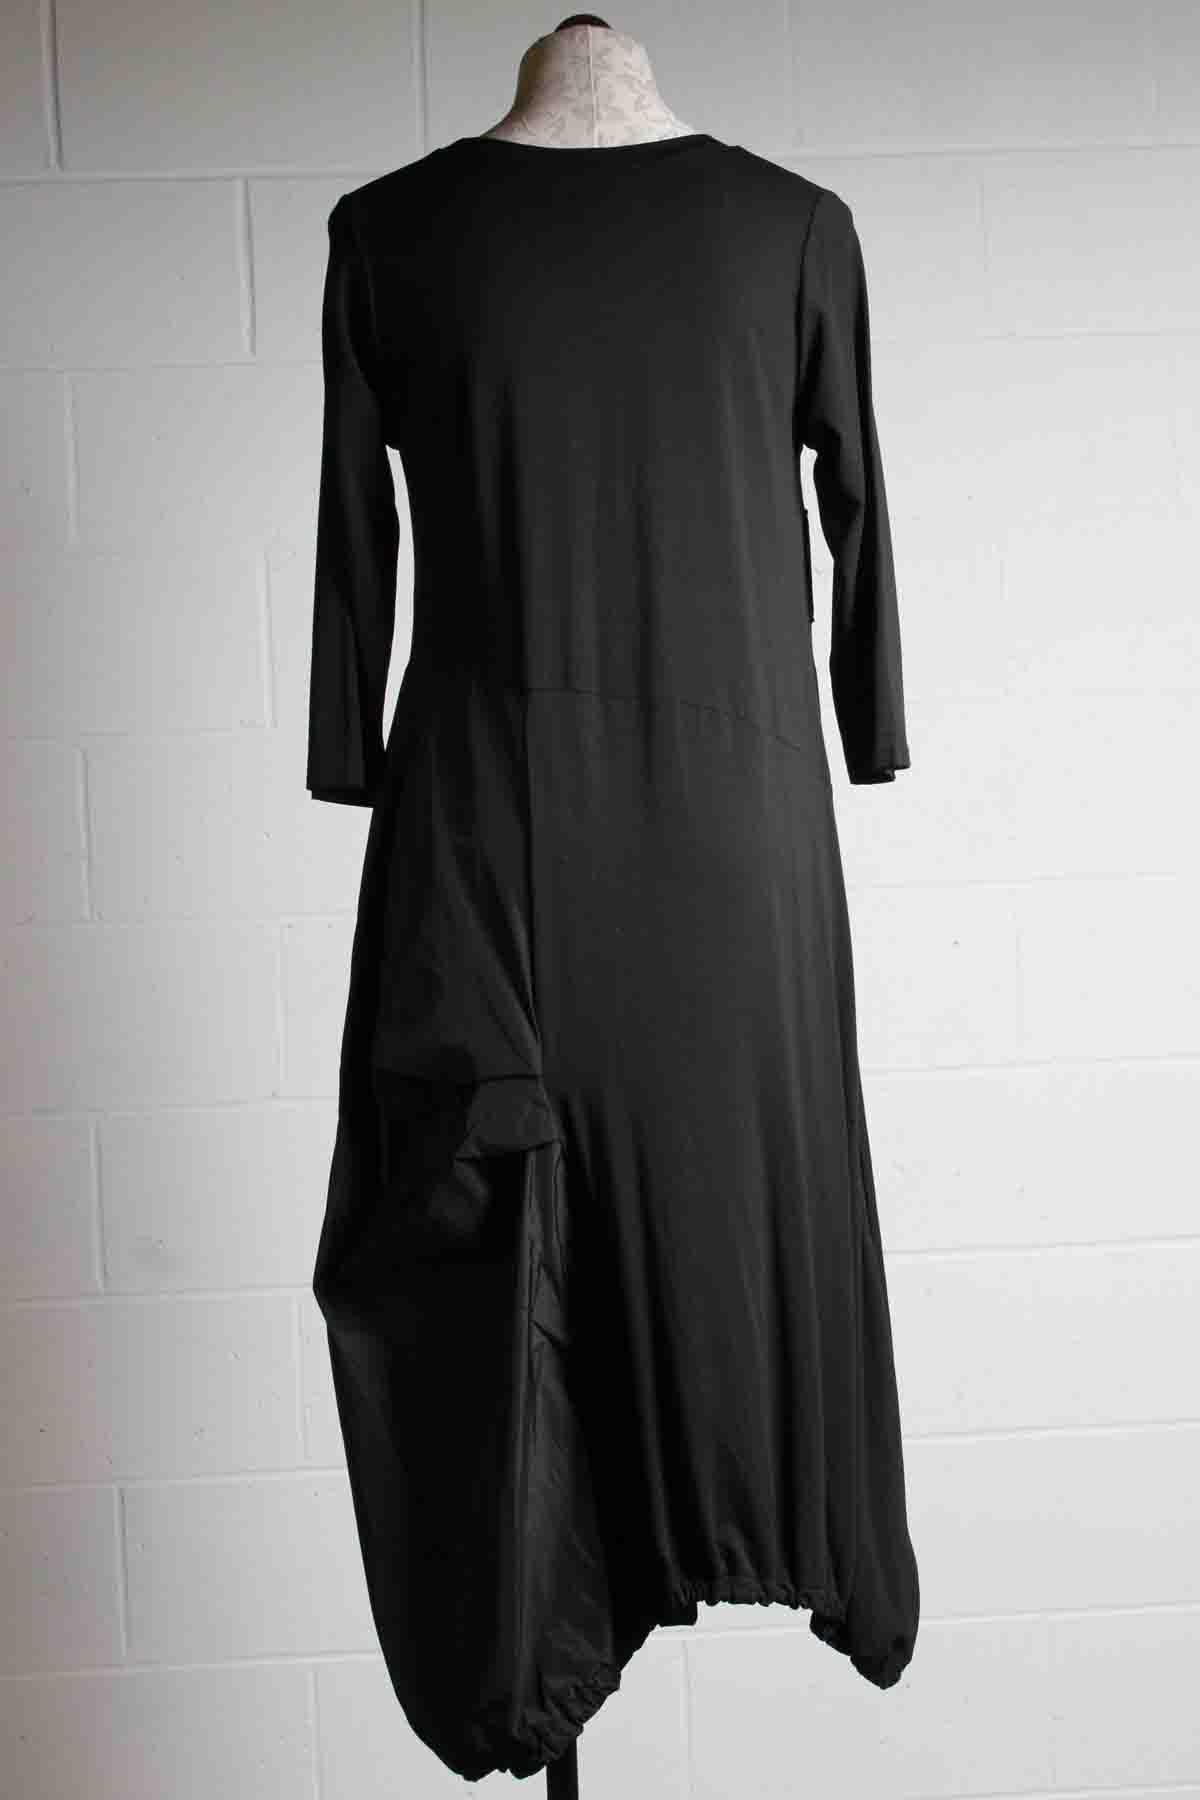 back view of black long sleeve dress by Reina Lee with an asymmetrical gathered bottom in contrasting fabrics